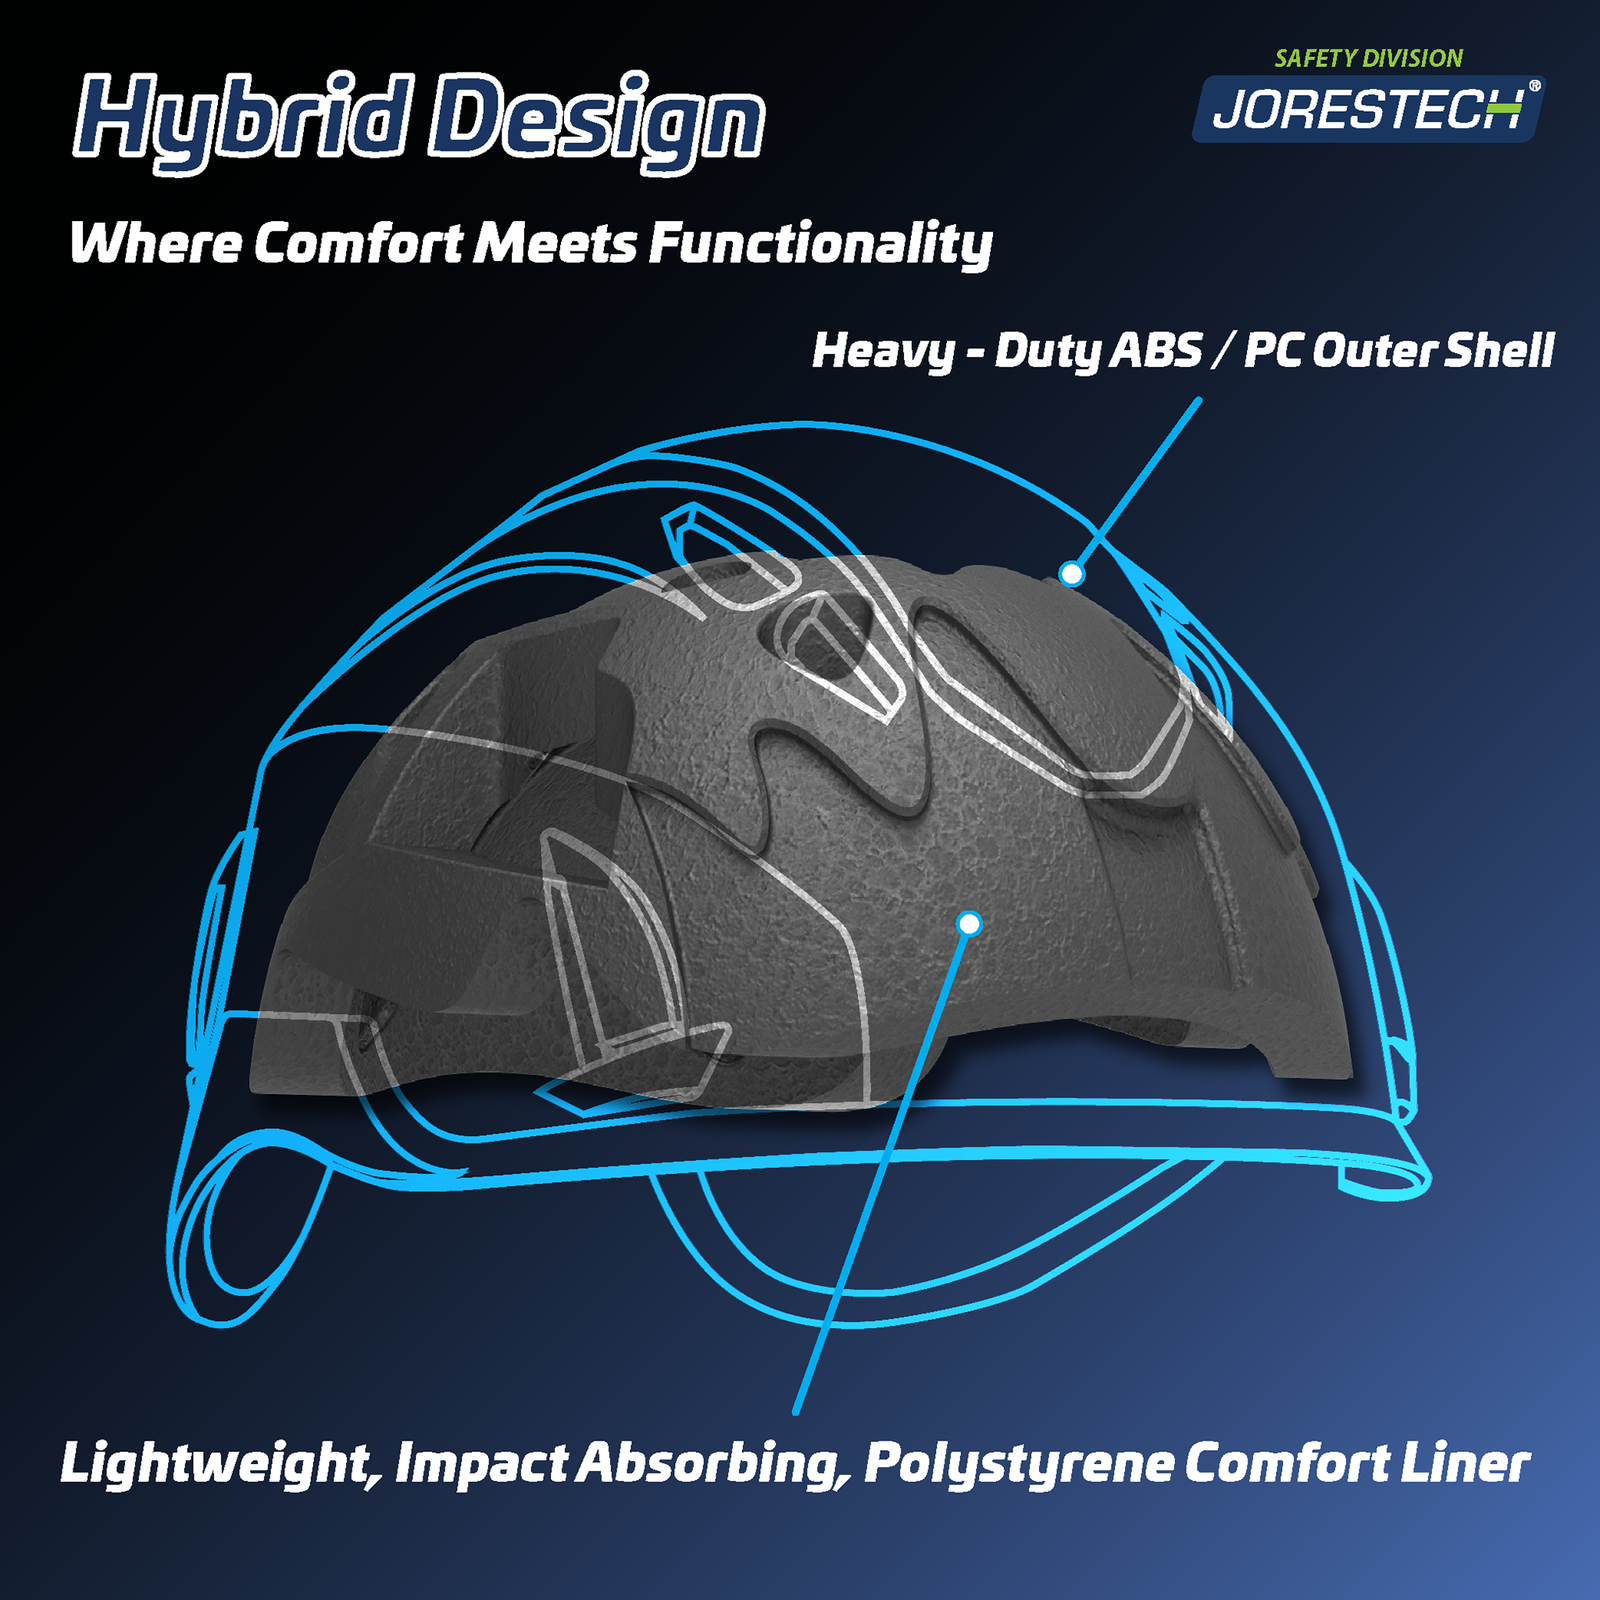 Features the inner liner that is part of the JORESTECH climbing hard hat, that offers improved protection. Text in banner reads: Hybrid design, where comfort meets functionality . Heavy duty ABS/PC outer shell. Lightweight, impart absorbing, polystyrene comfort liner